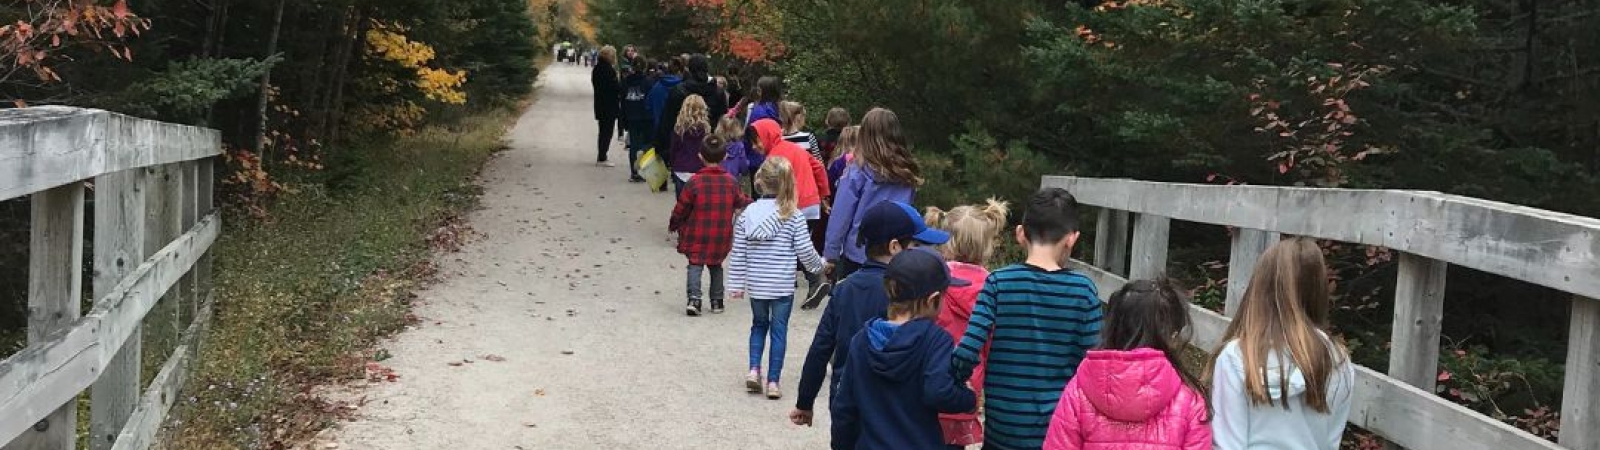 a group of school aged children walking on a gravel path with wooden railings on the side of a section of it. trees, with their leaves showing fall colours, are on either side of the path